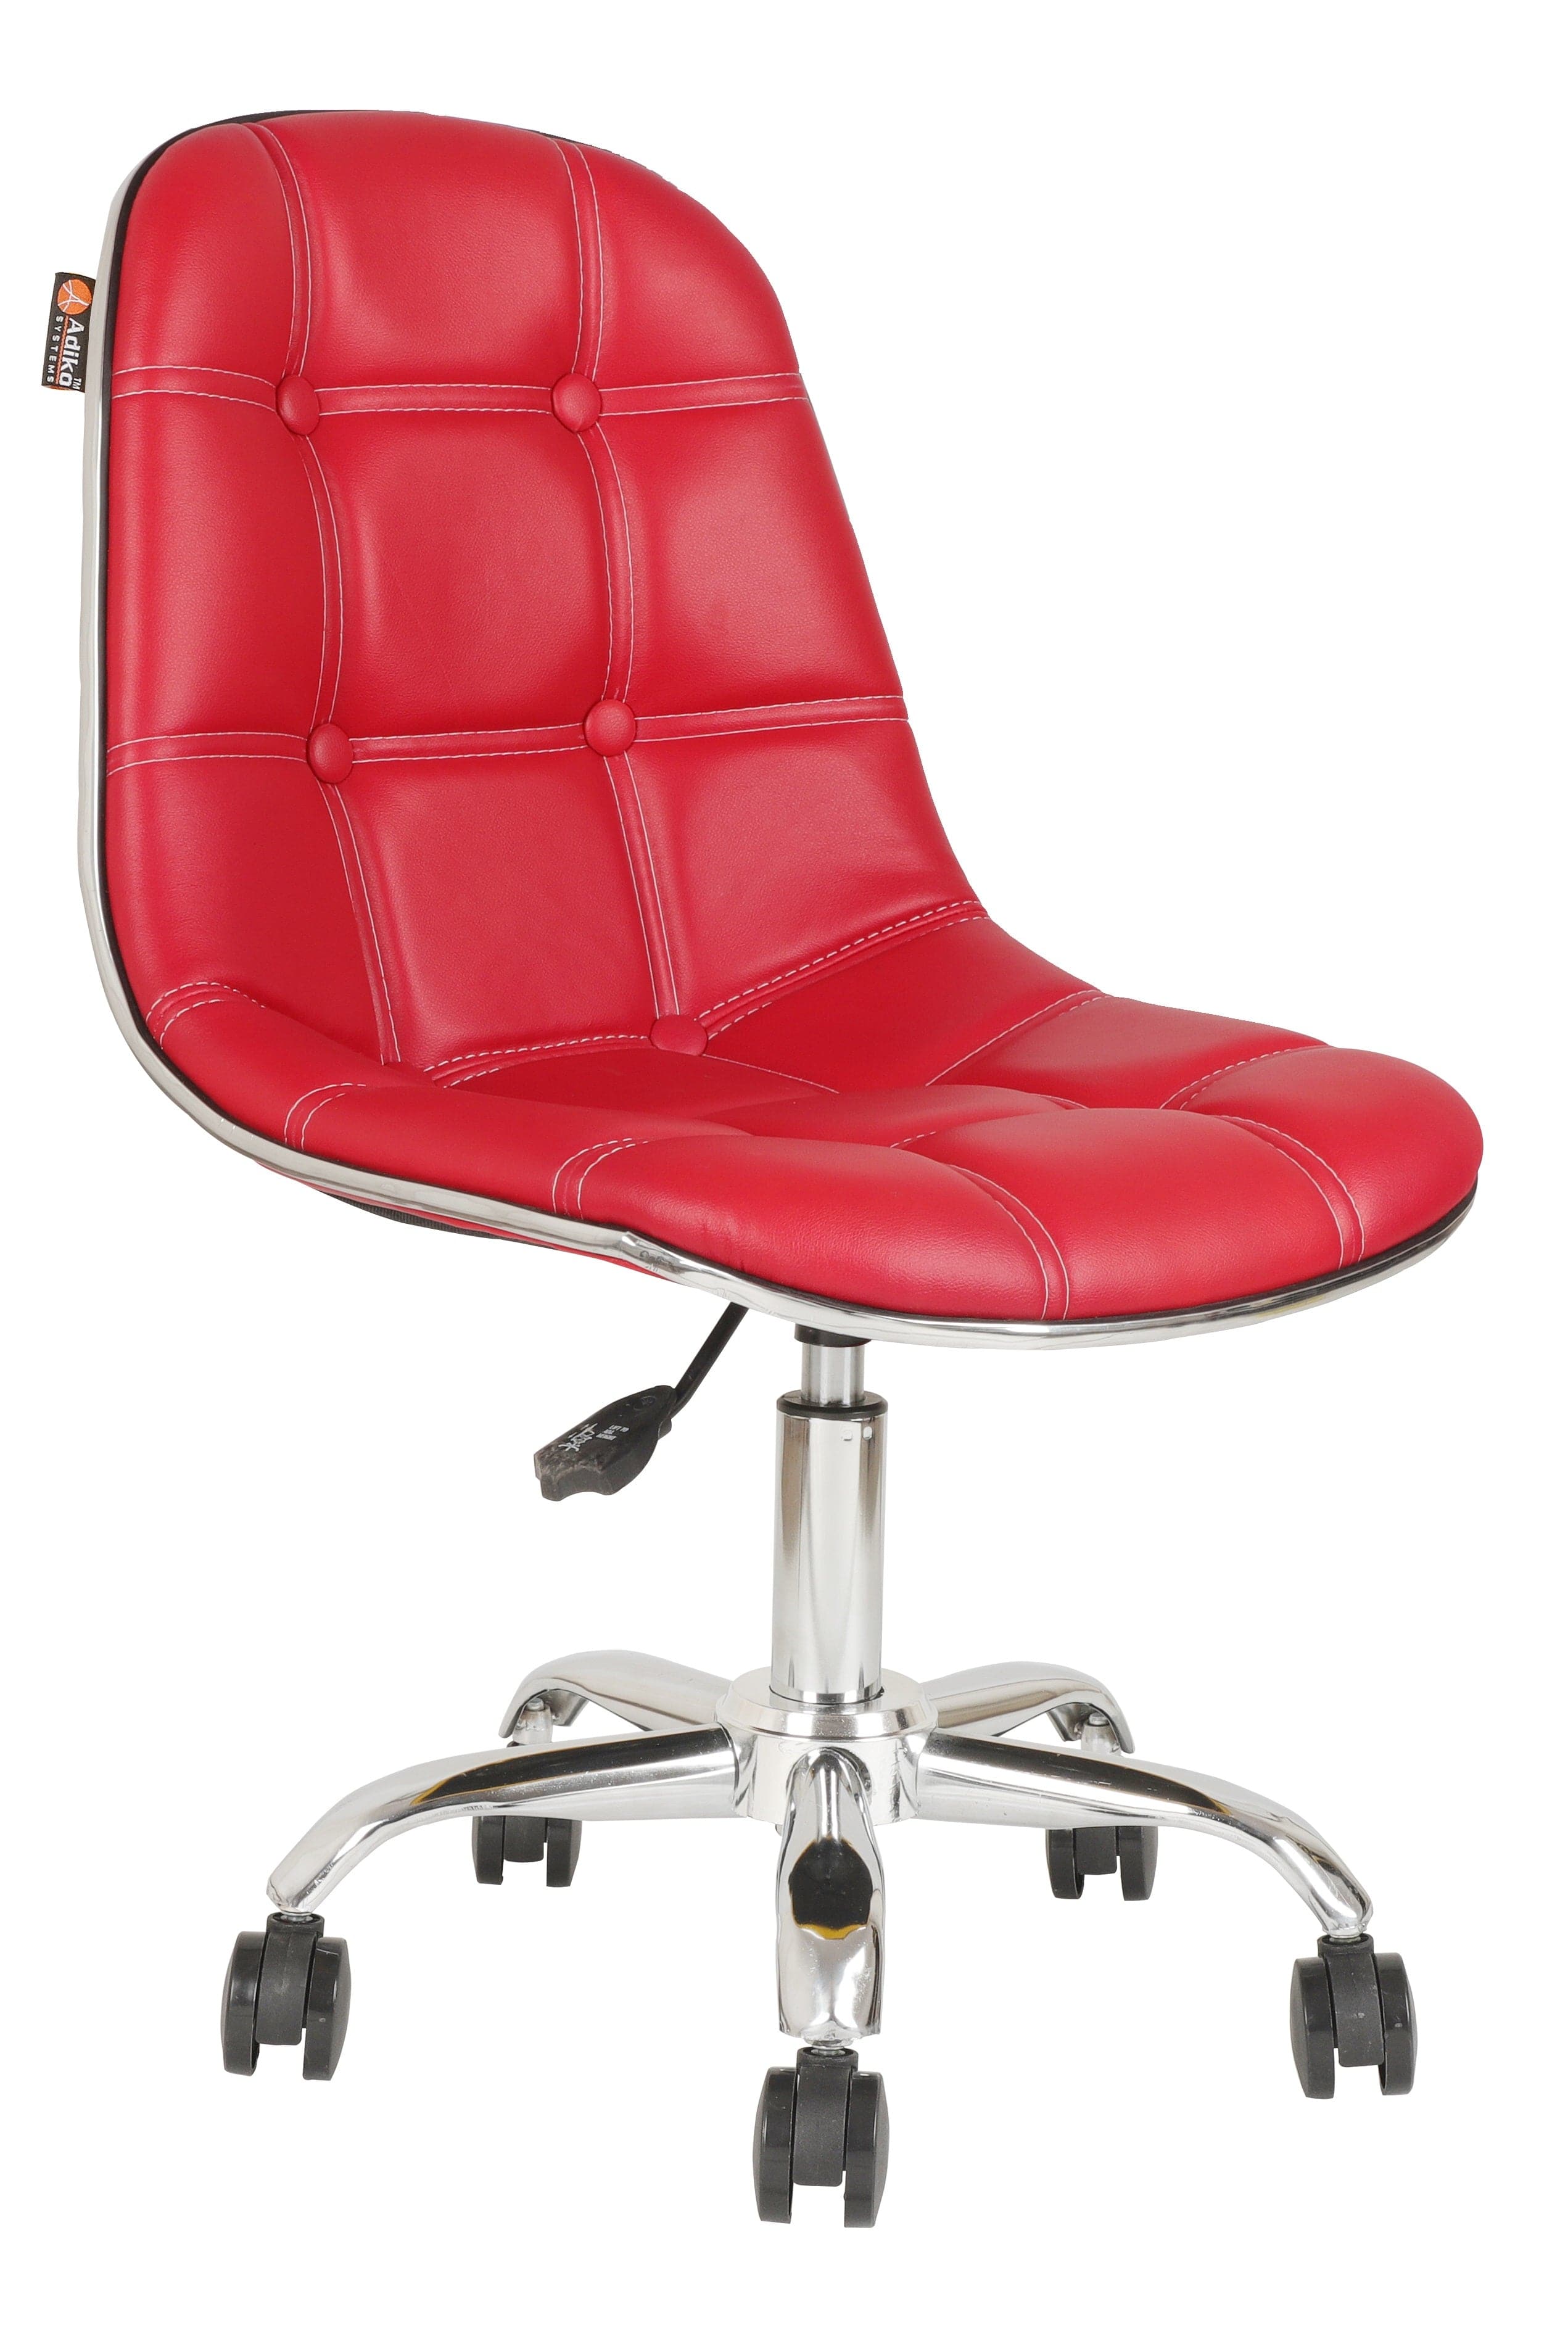 Adiko Lounge Chair in Red